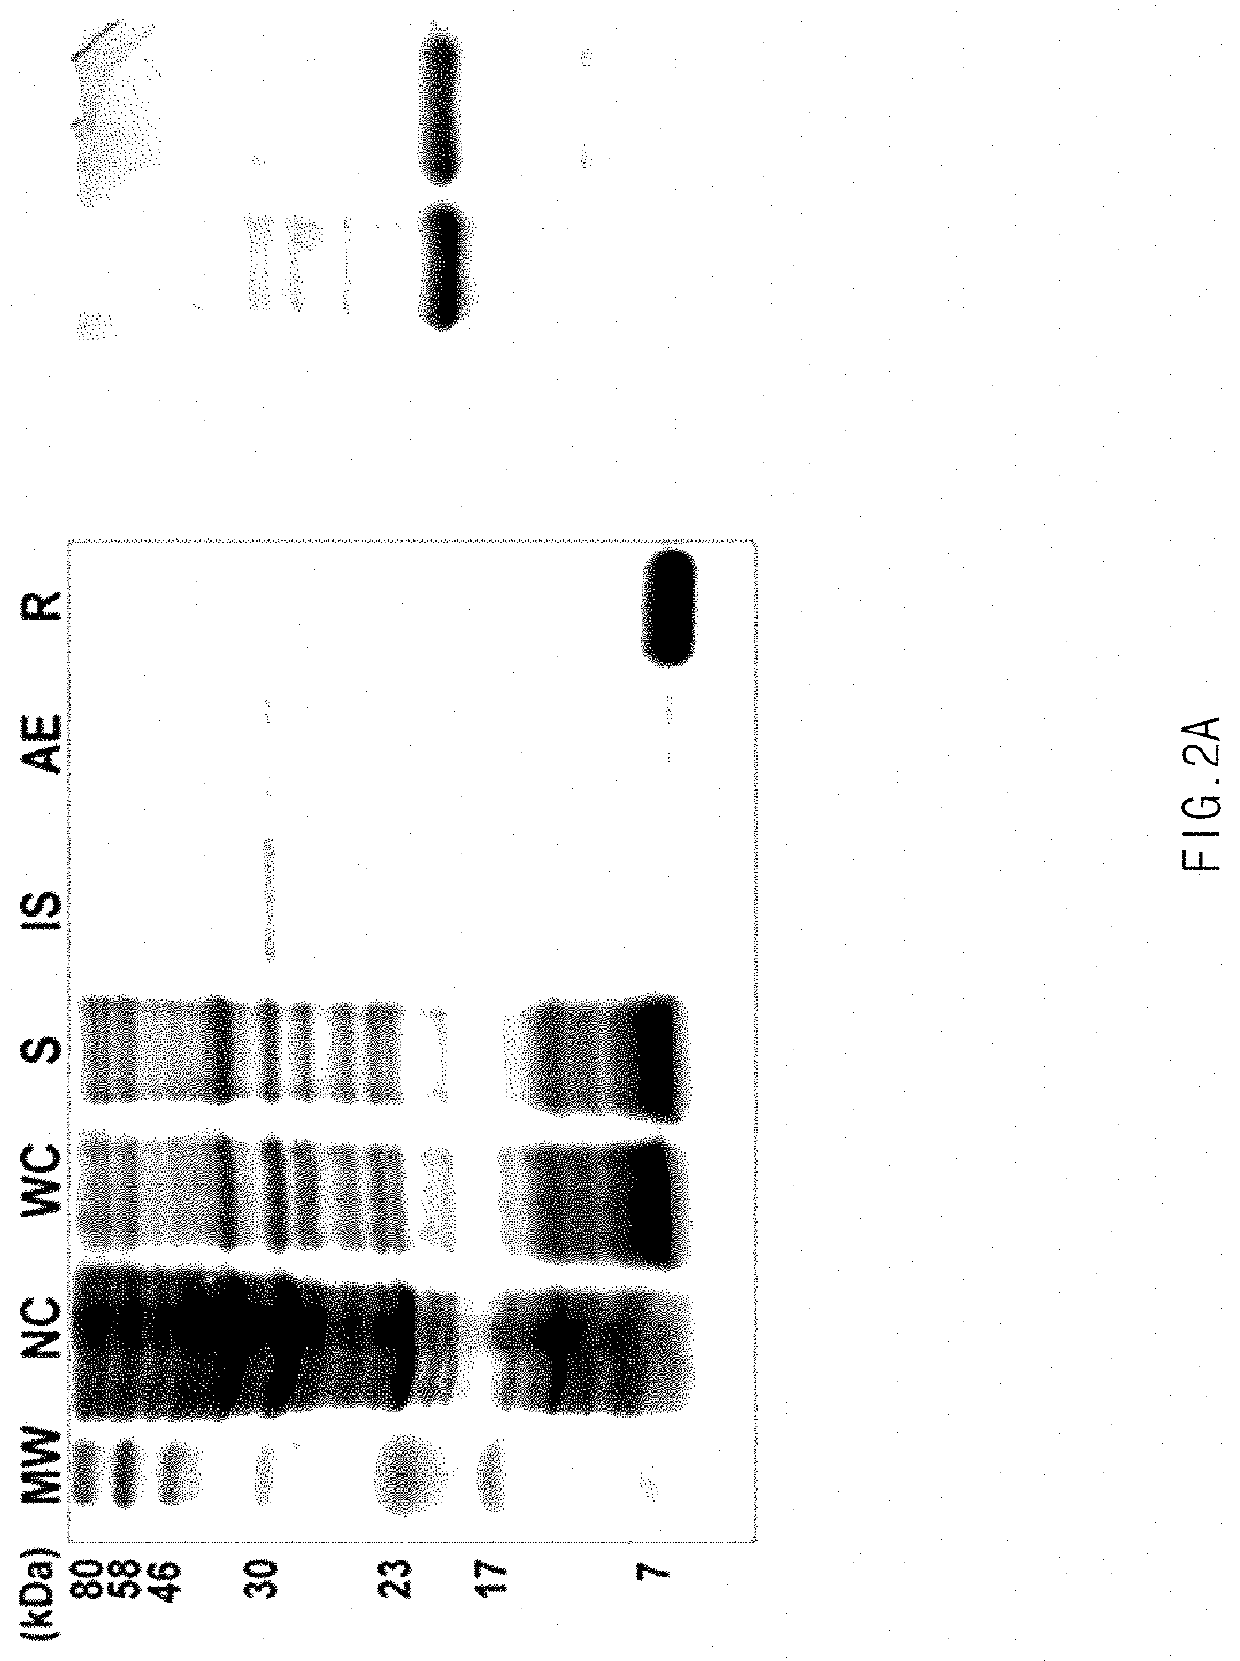 Method for separating and purifying mussel adhesive protein